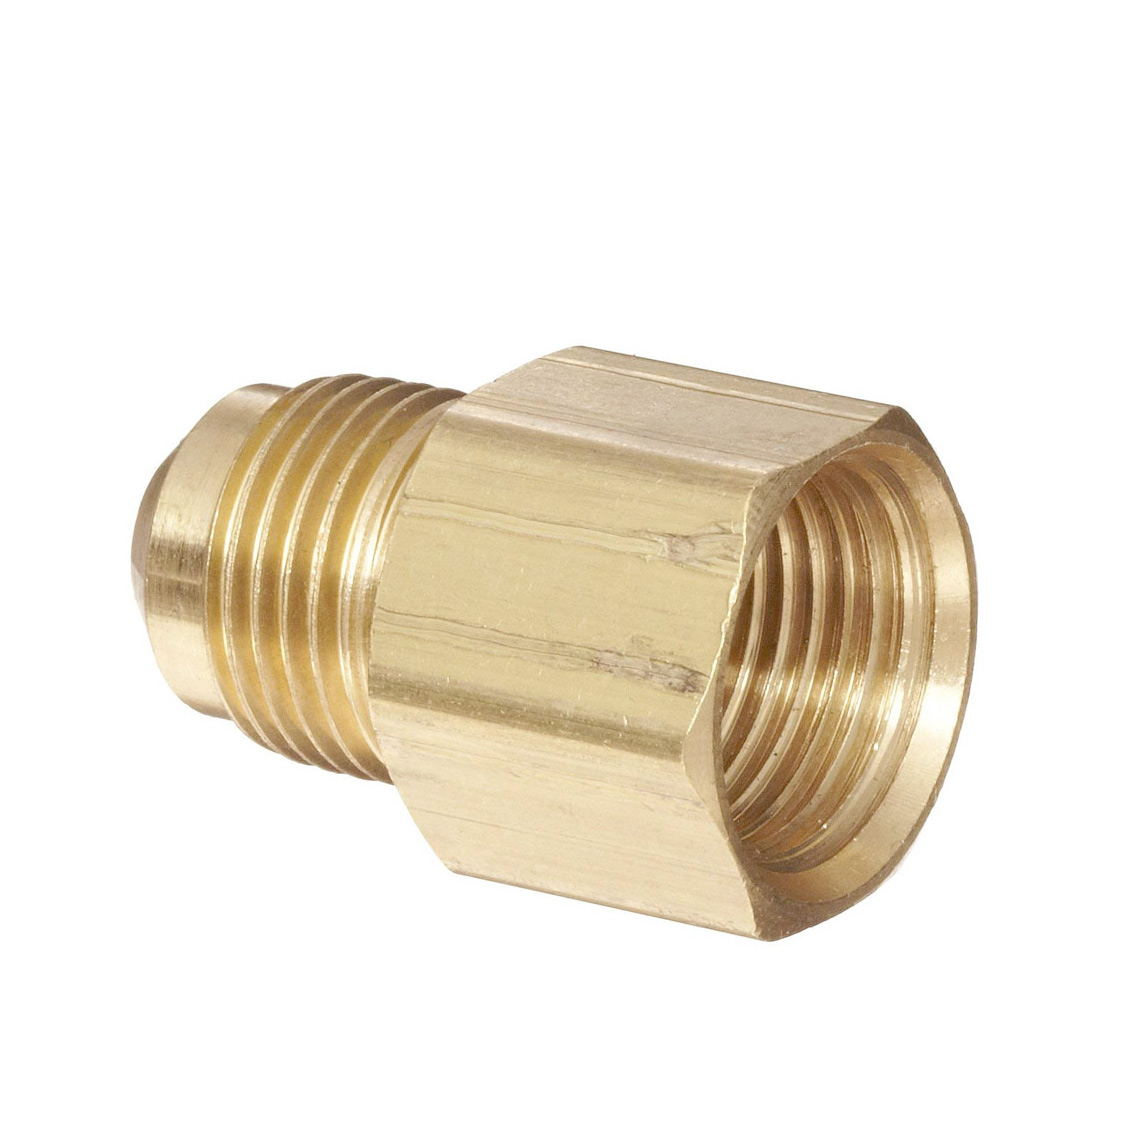 BRASS FORGED TEE Fitting EQUAL T 1" Female NPT Pipe Thread Tubing Air Fuel ONE 